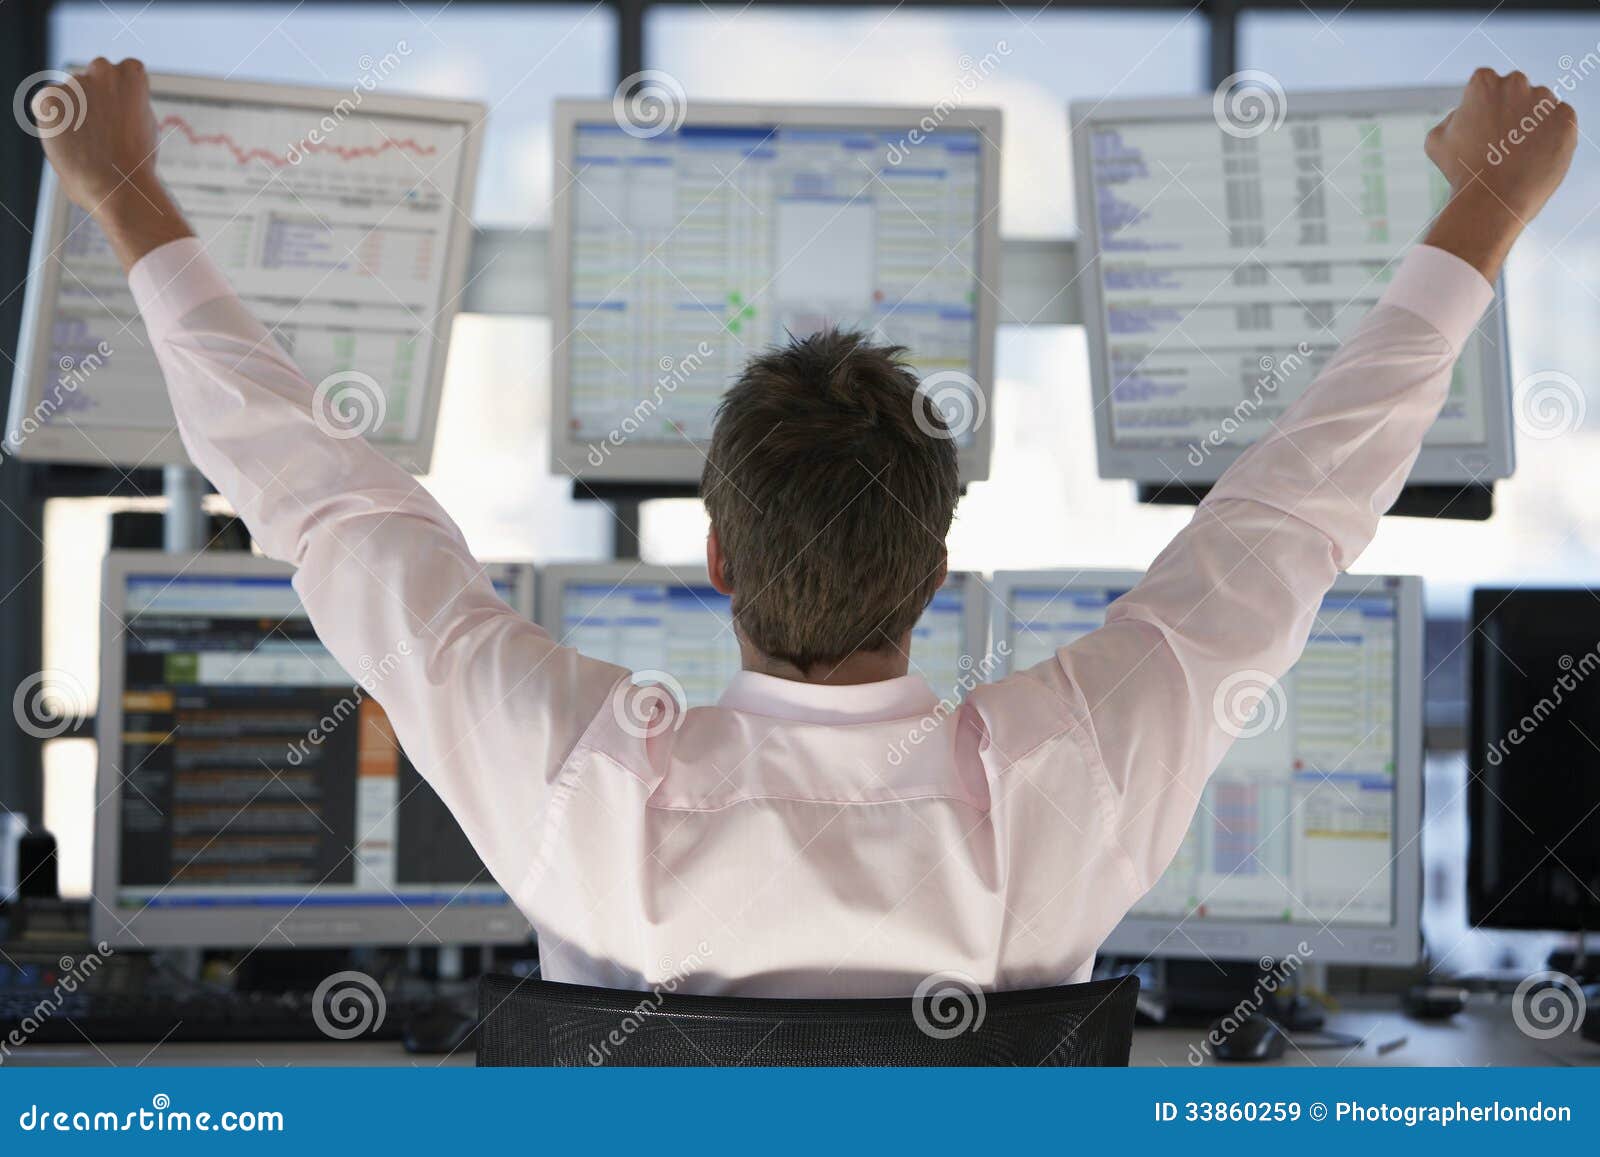 stock trader watching computer screens with hands raised